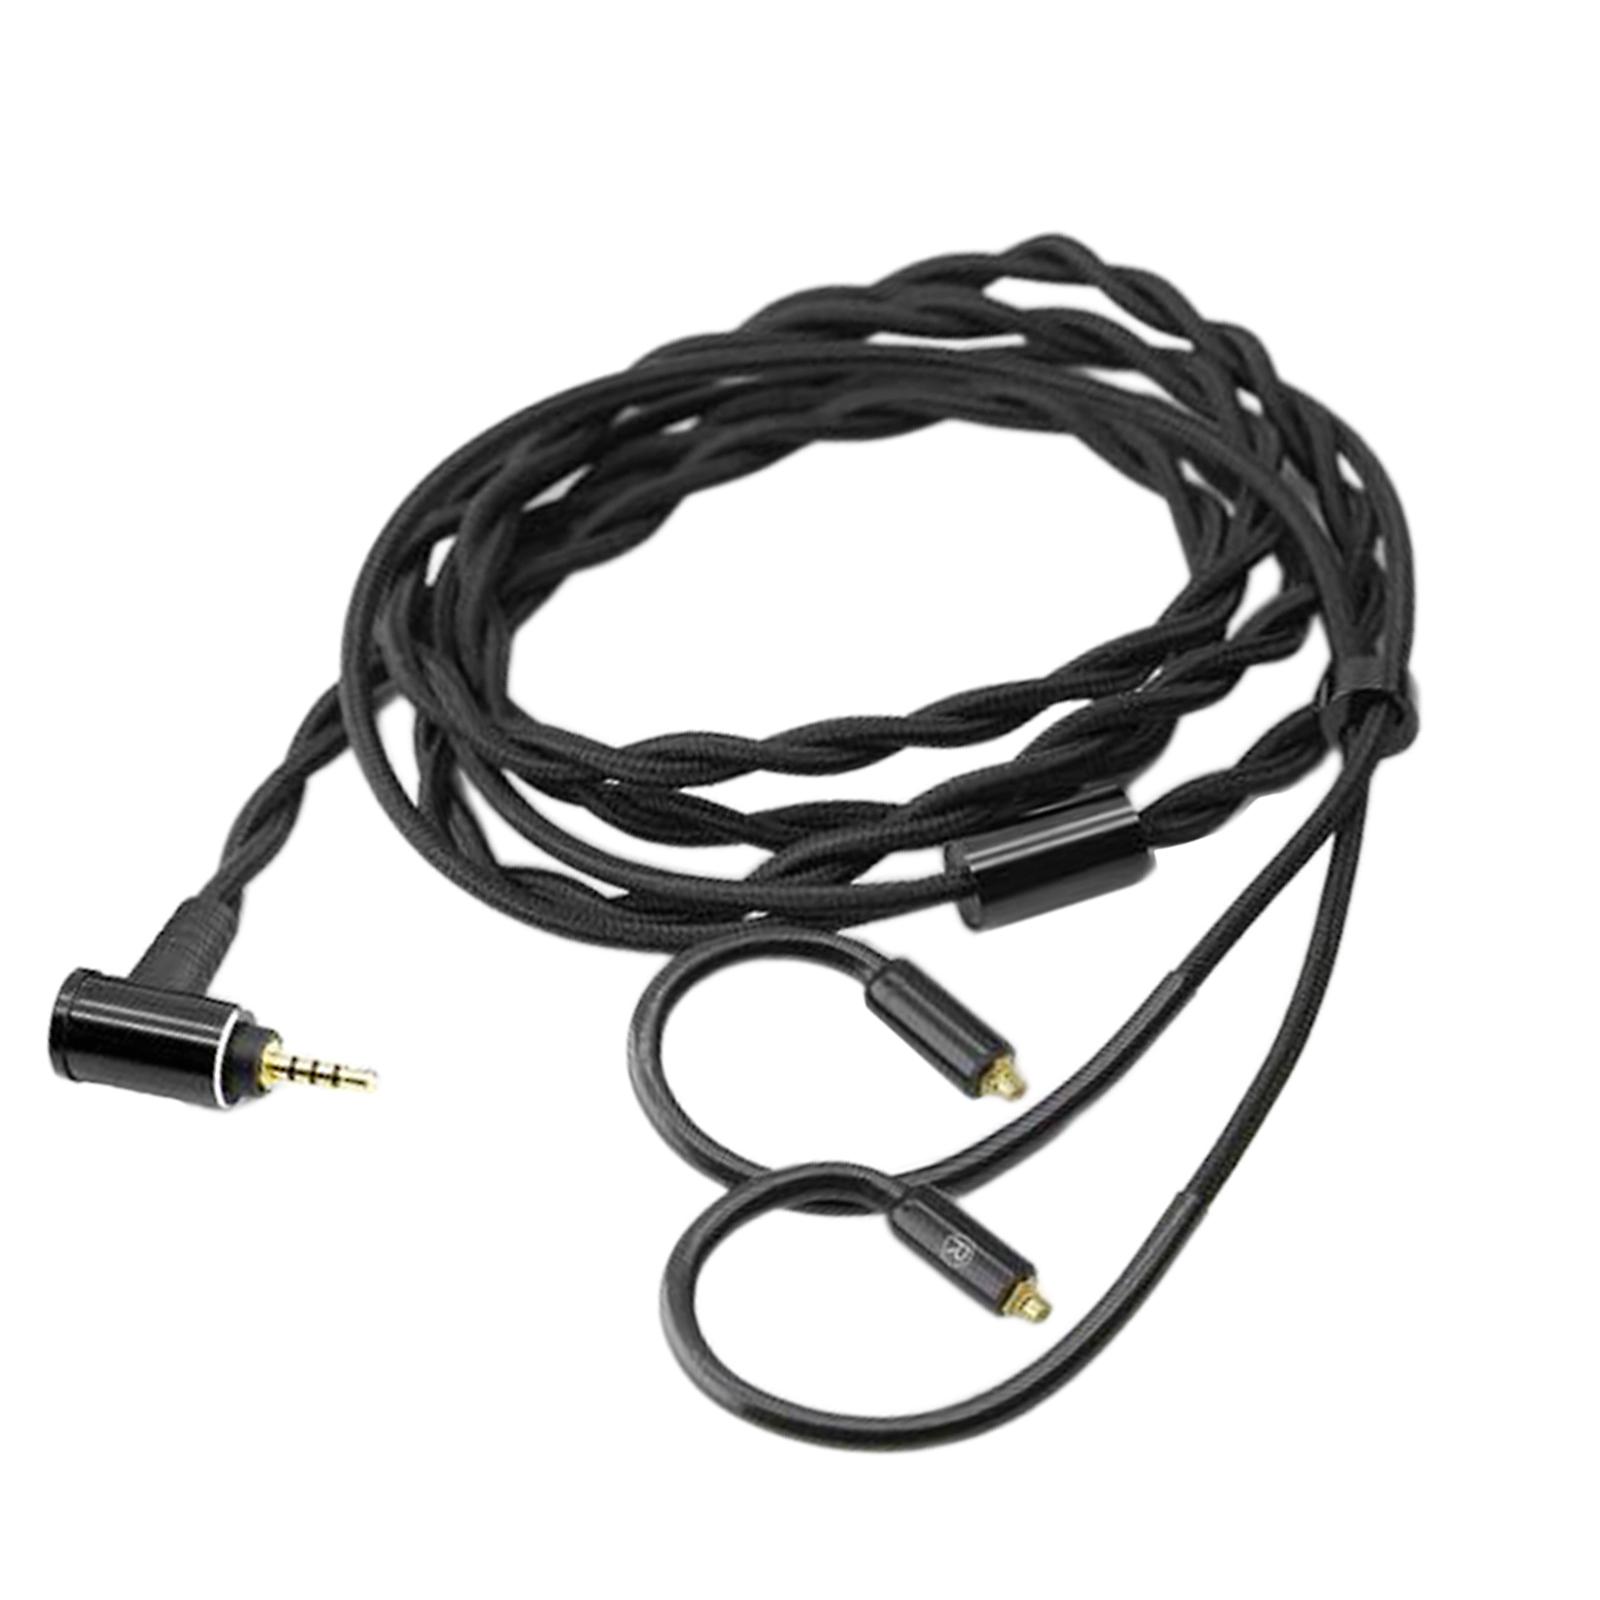 Mmcx Earphone Upgrade Cable Accessories for SE215 2.5mm Balanced Plug